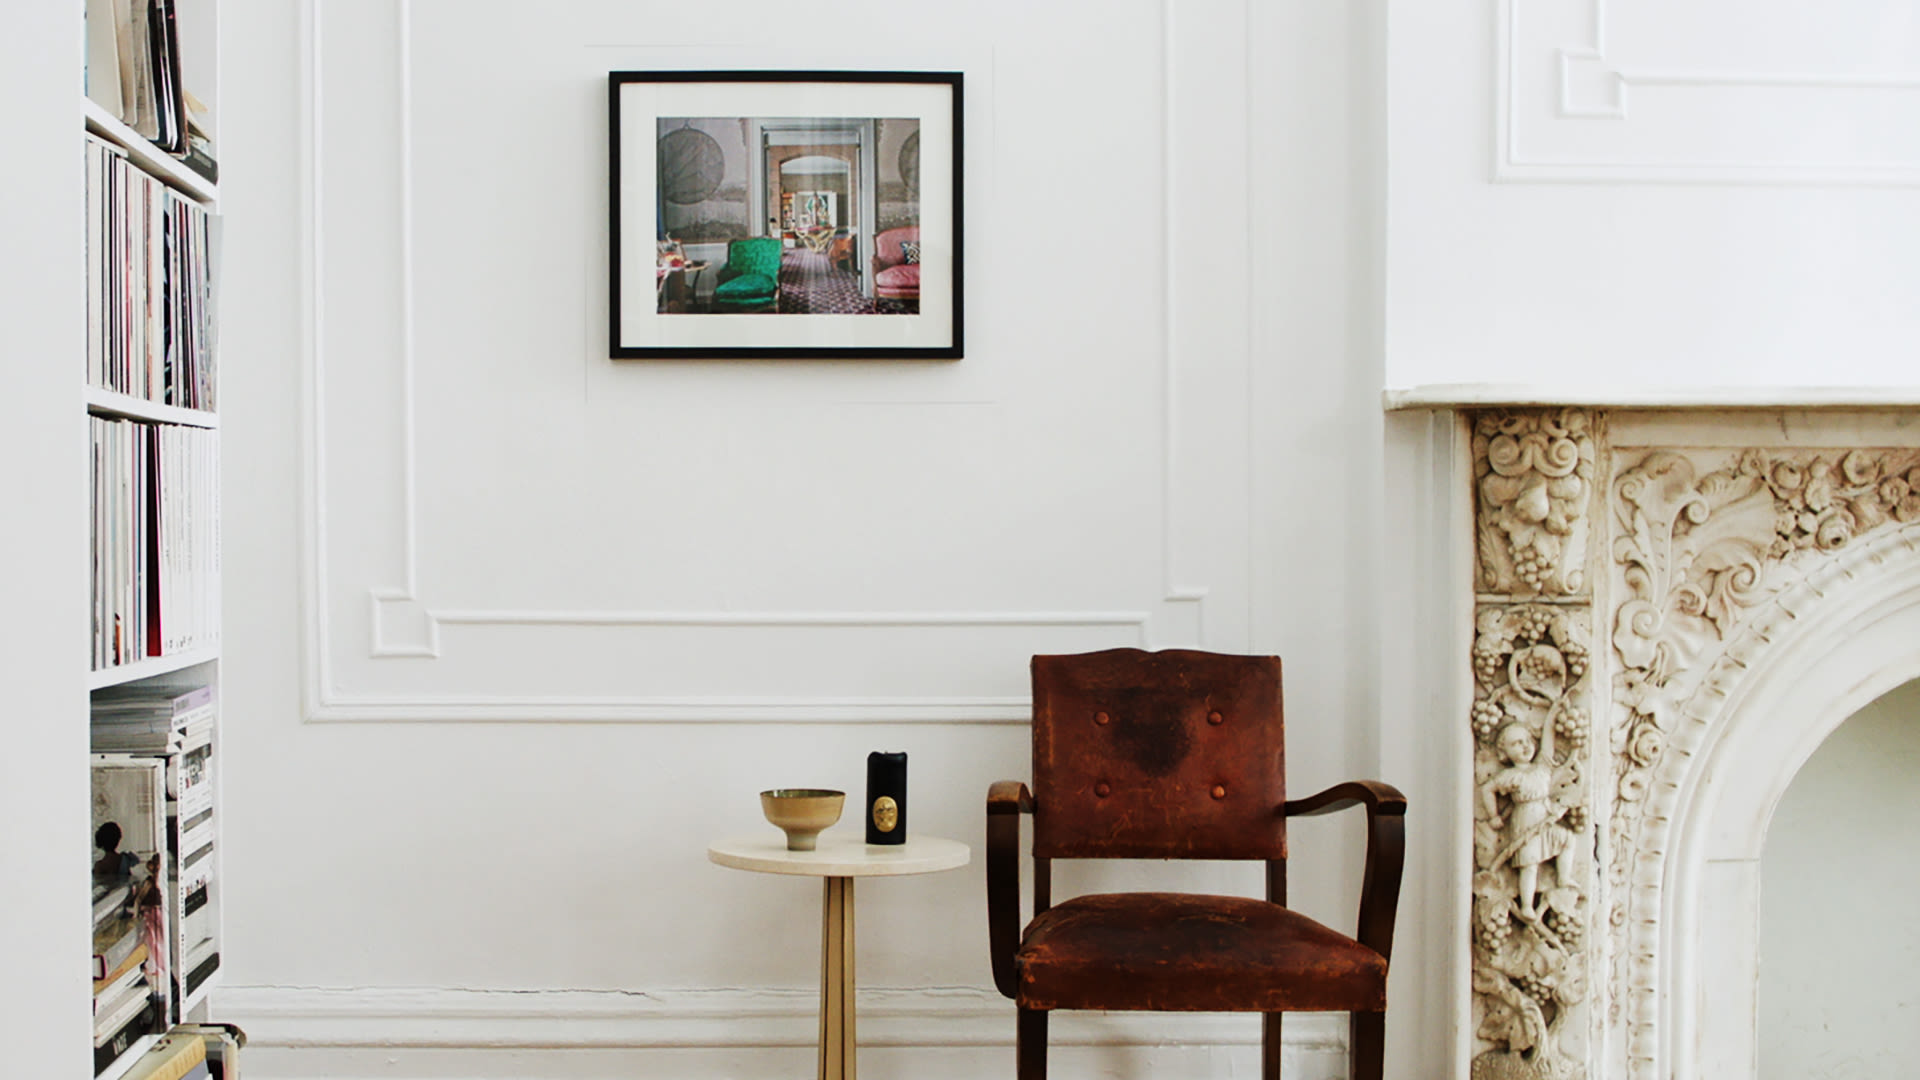 How to Hang a Picture: 5 Tips for Hanging Photos on the Wall, Architectural Digest